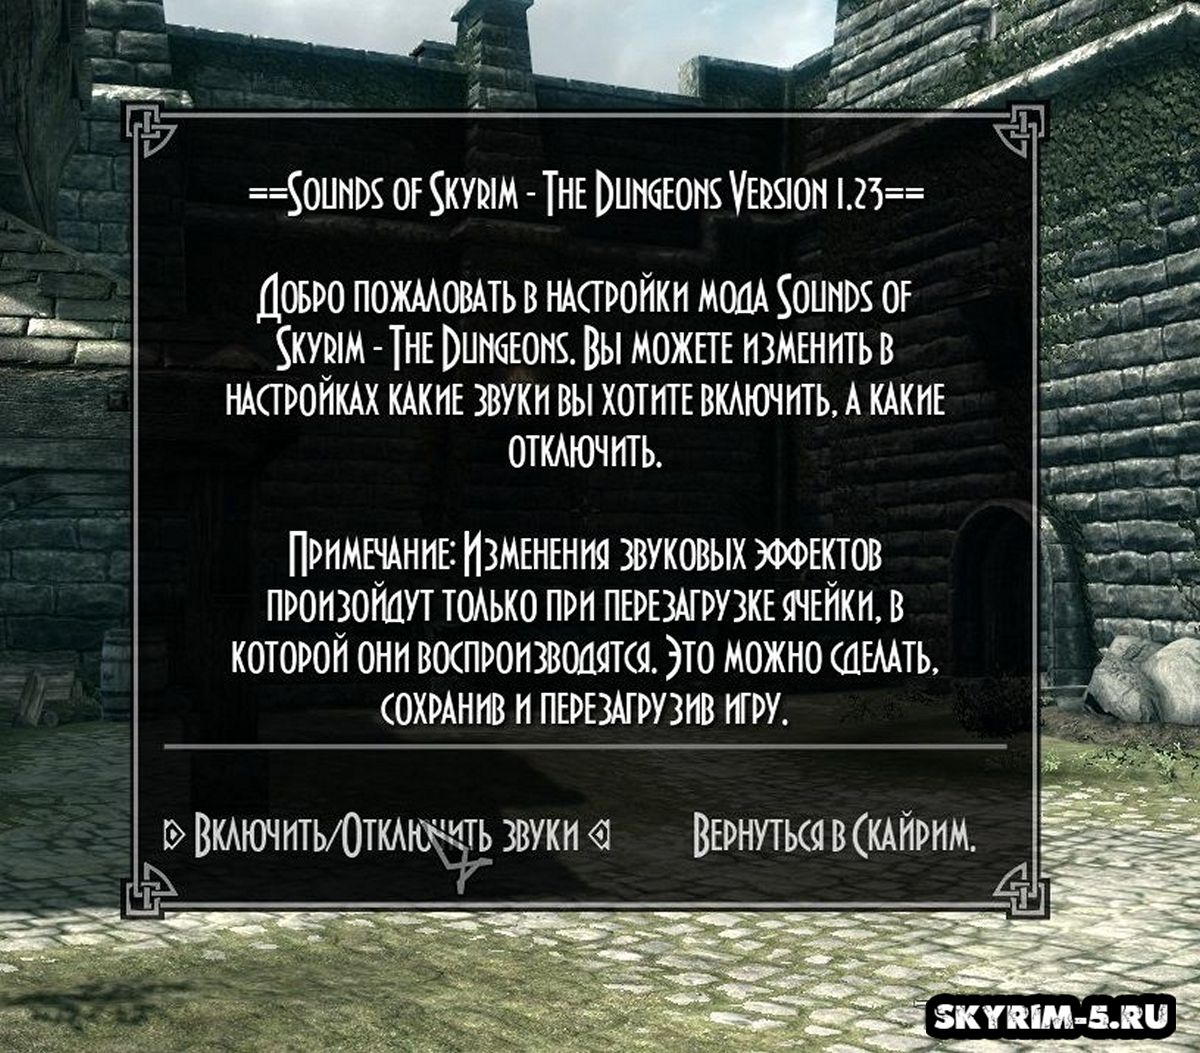 Sounds of Skyrim - The Dungeons - Russian